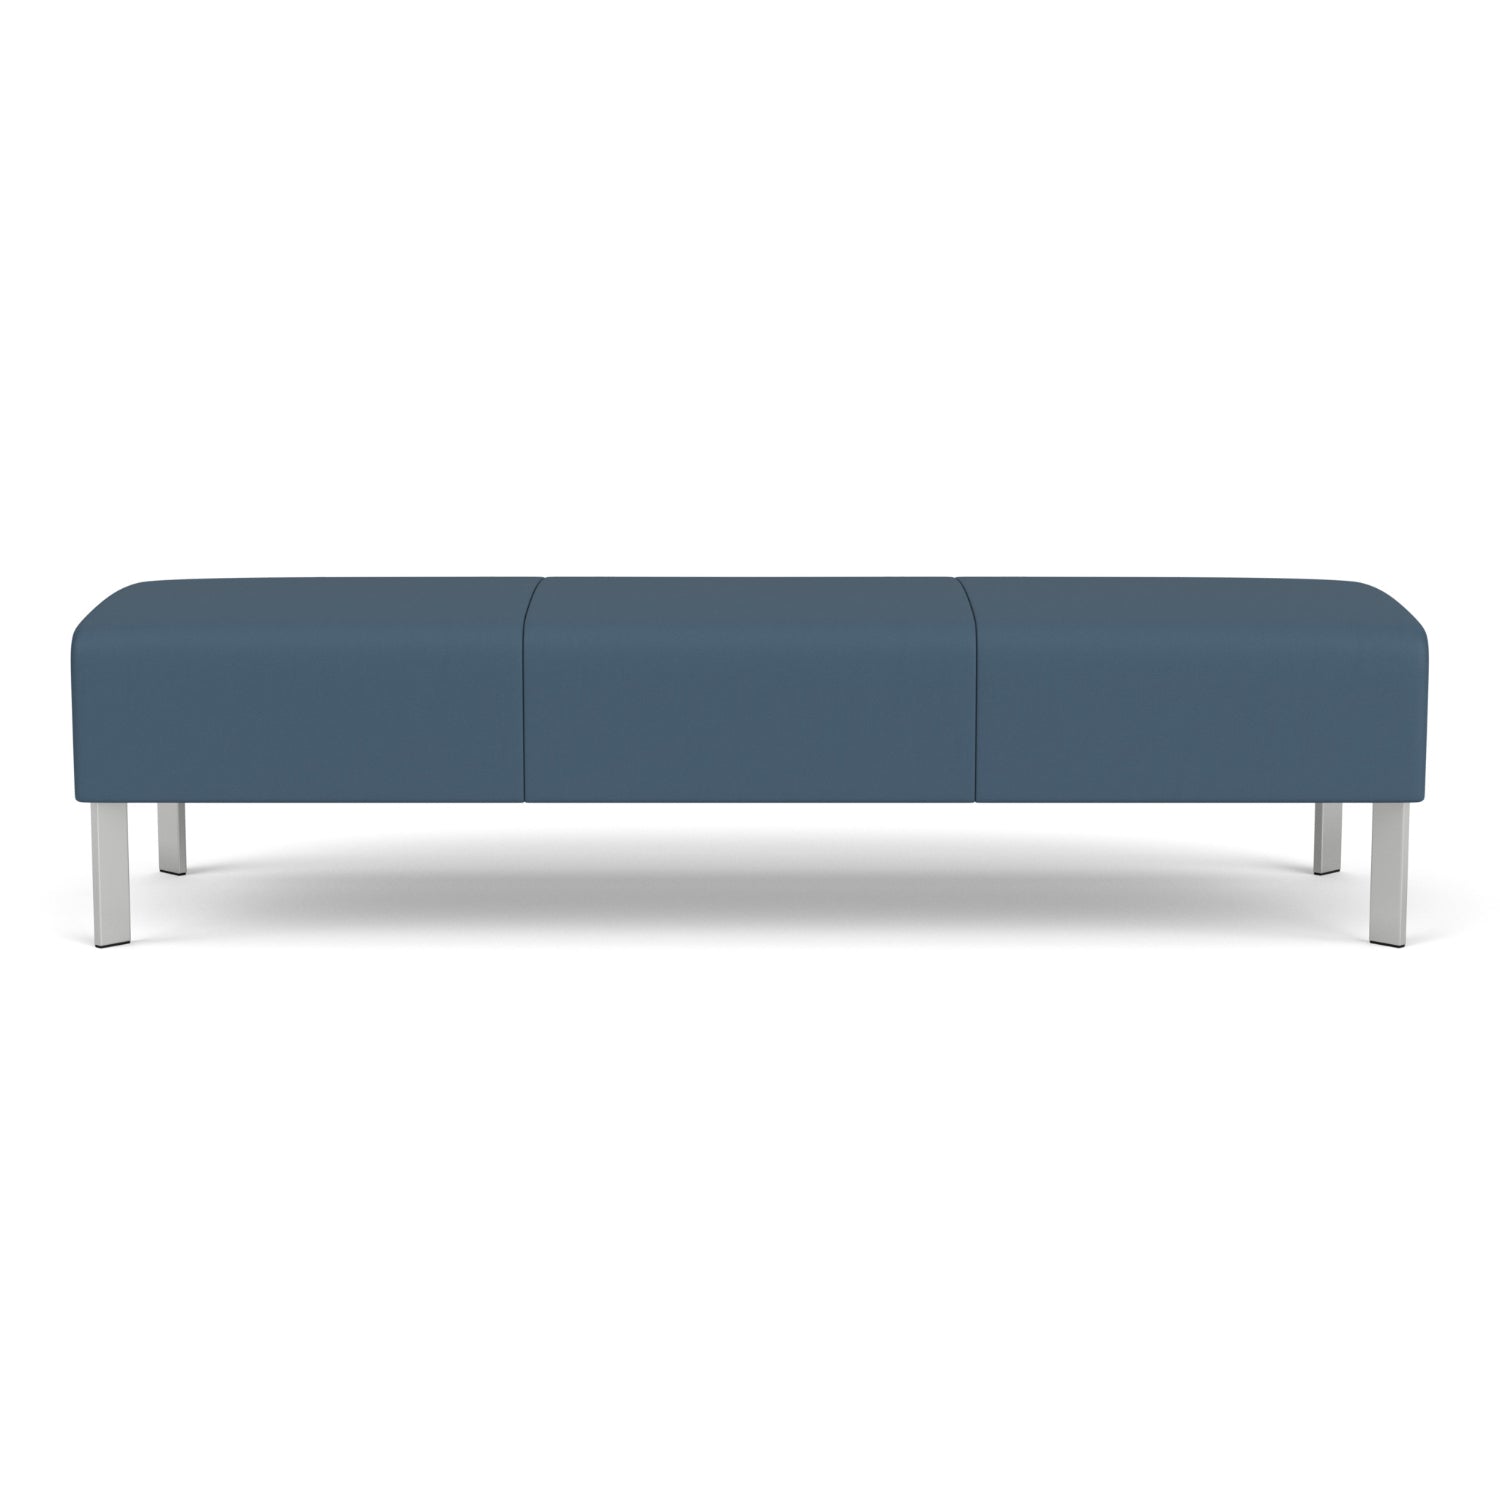 Luxe Collection Reception Seating, 3 Seat Bench, Standard Vinyl Upholstery, FREE SHIPPING